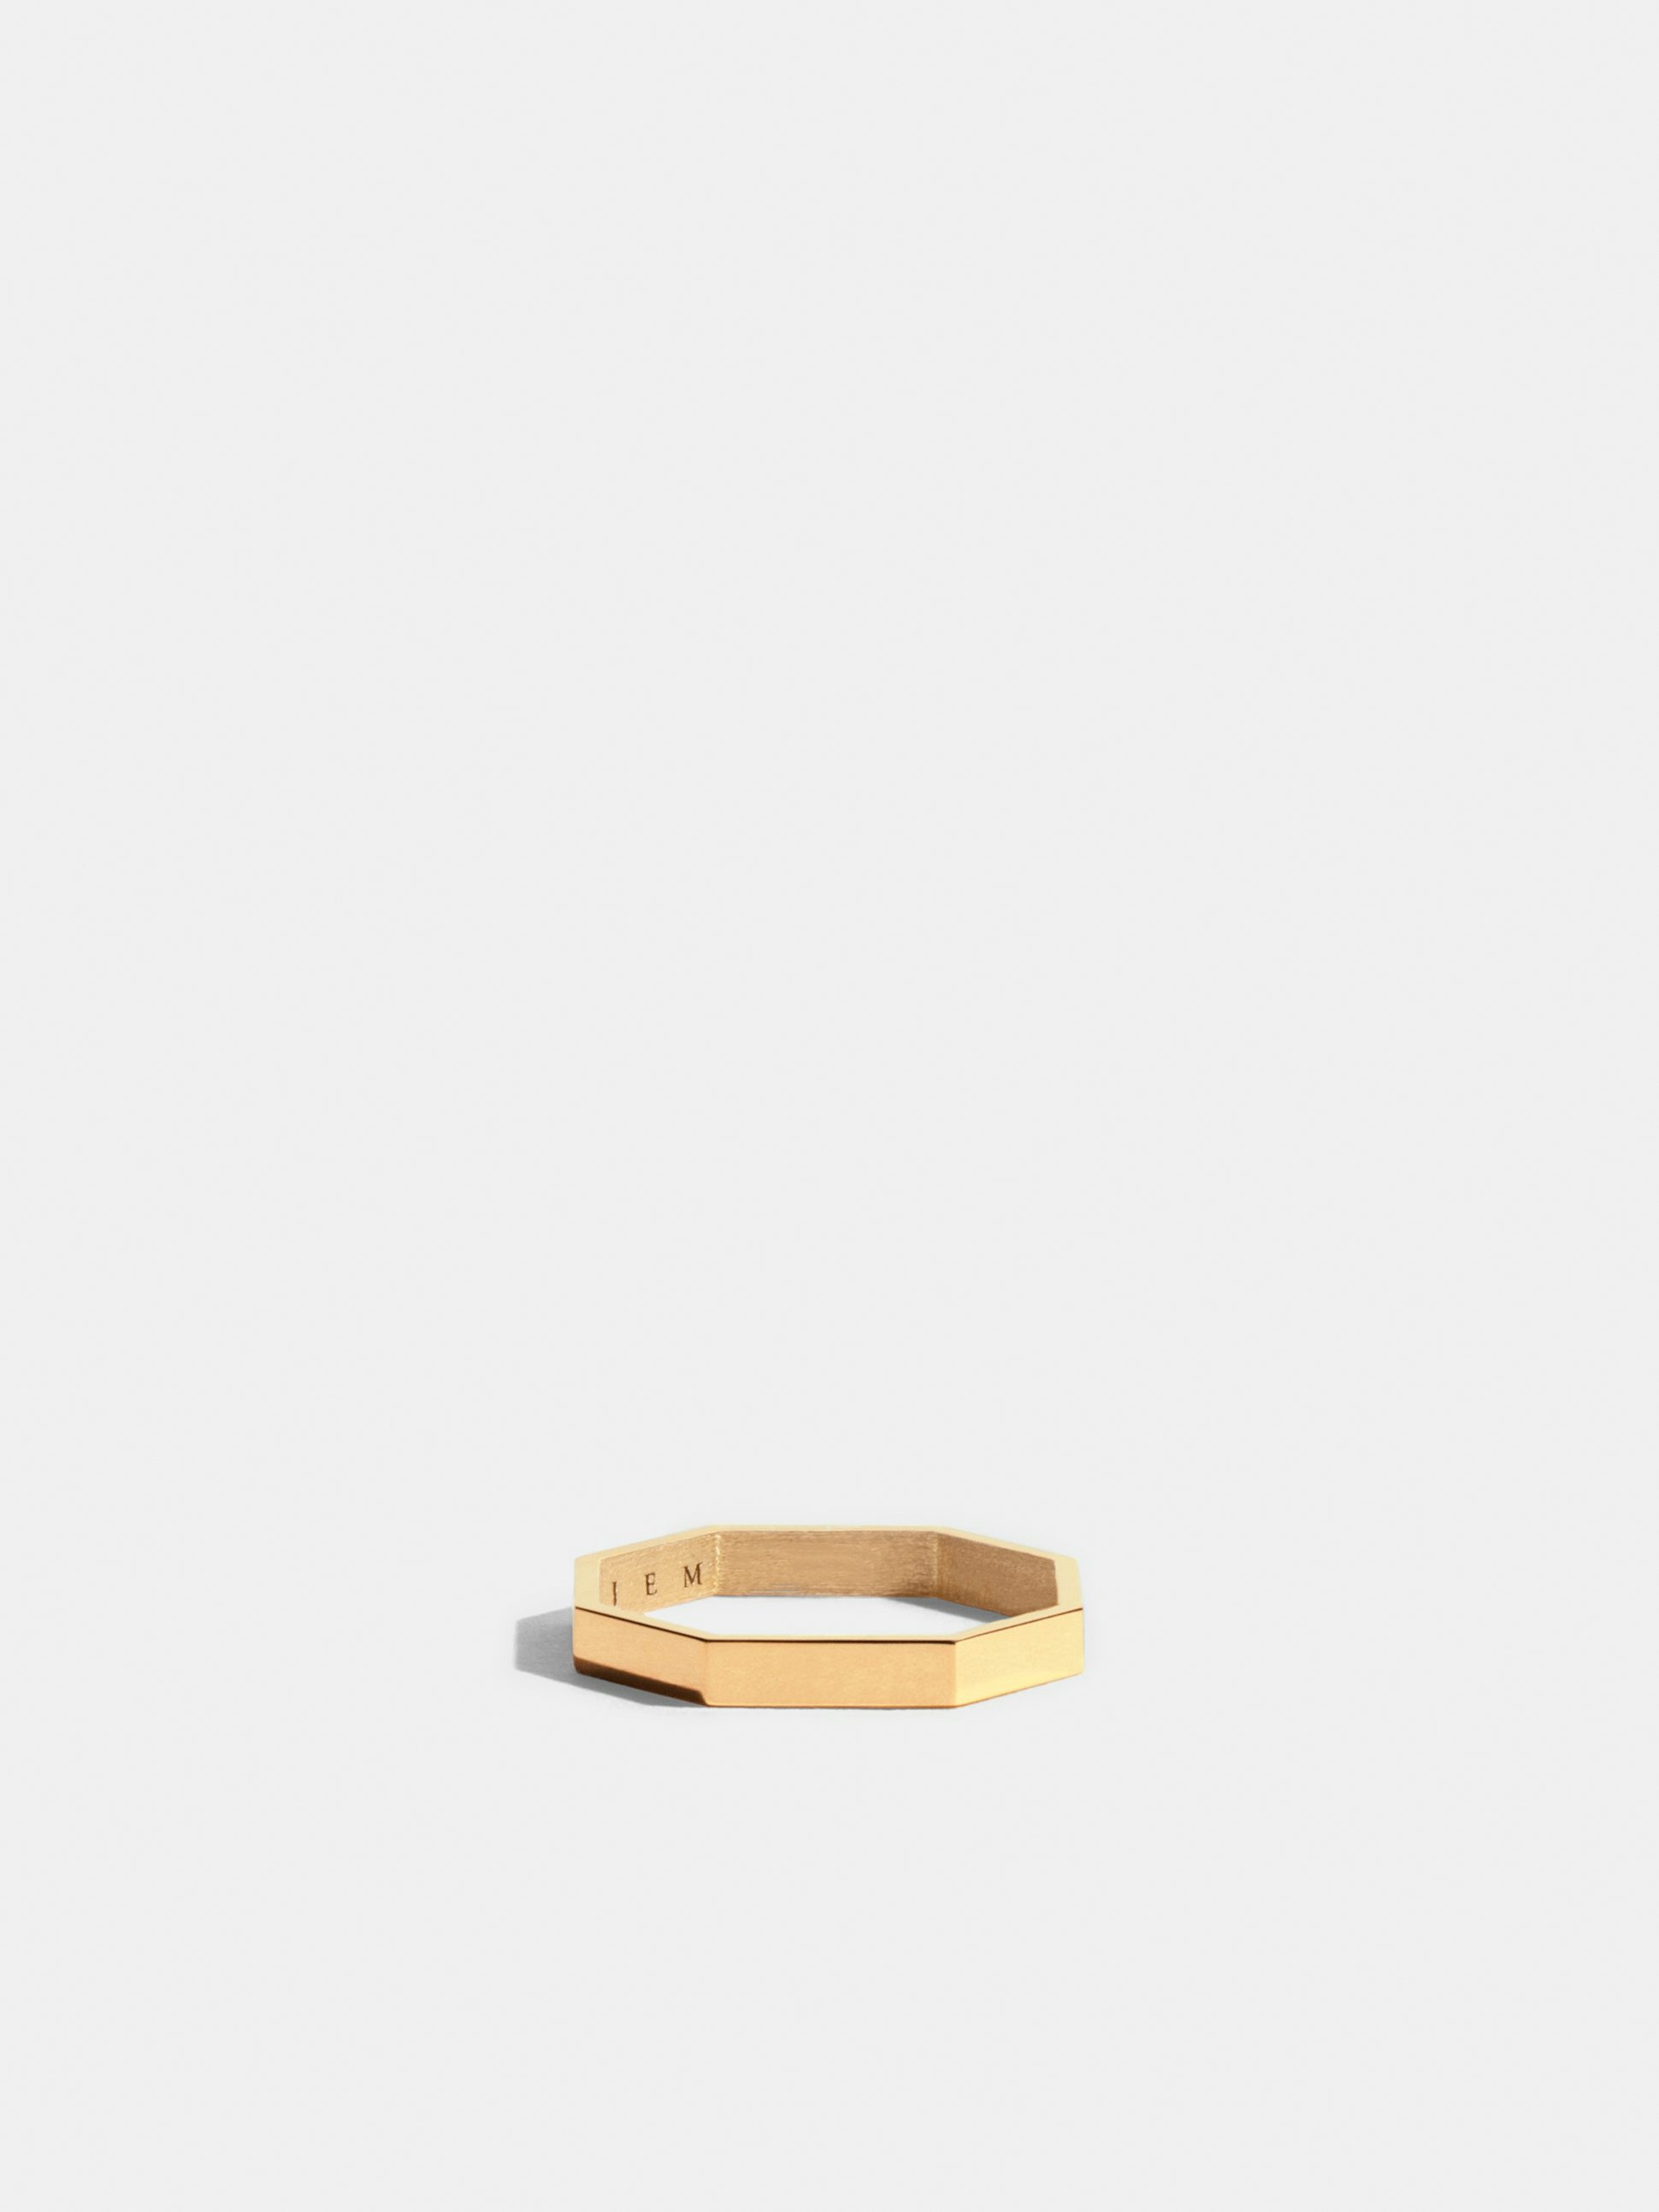 Octogone simple ring in 18k Fairmined ethical yellow gold